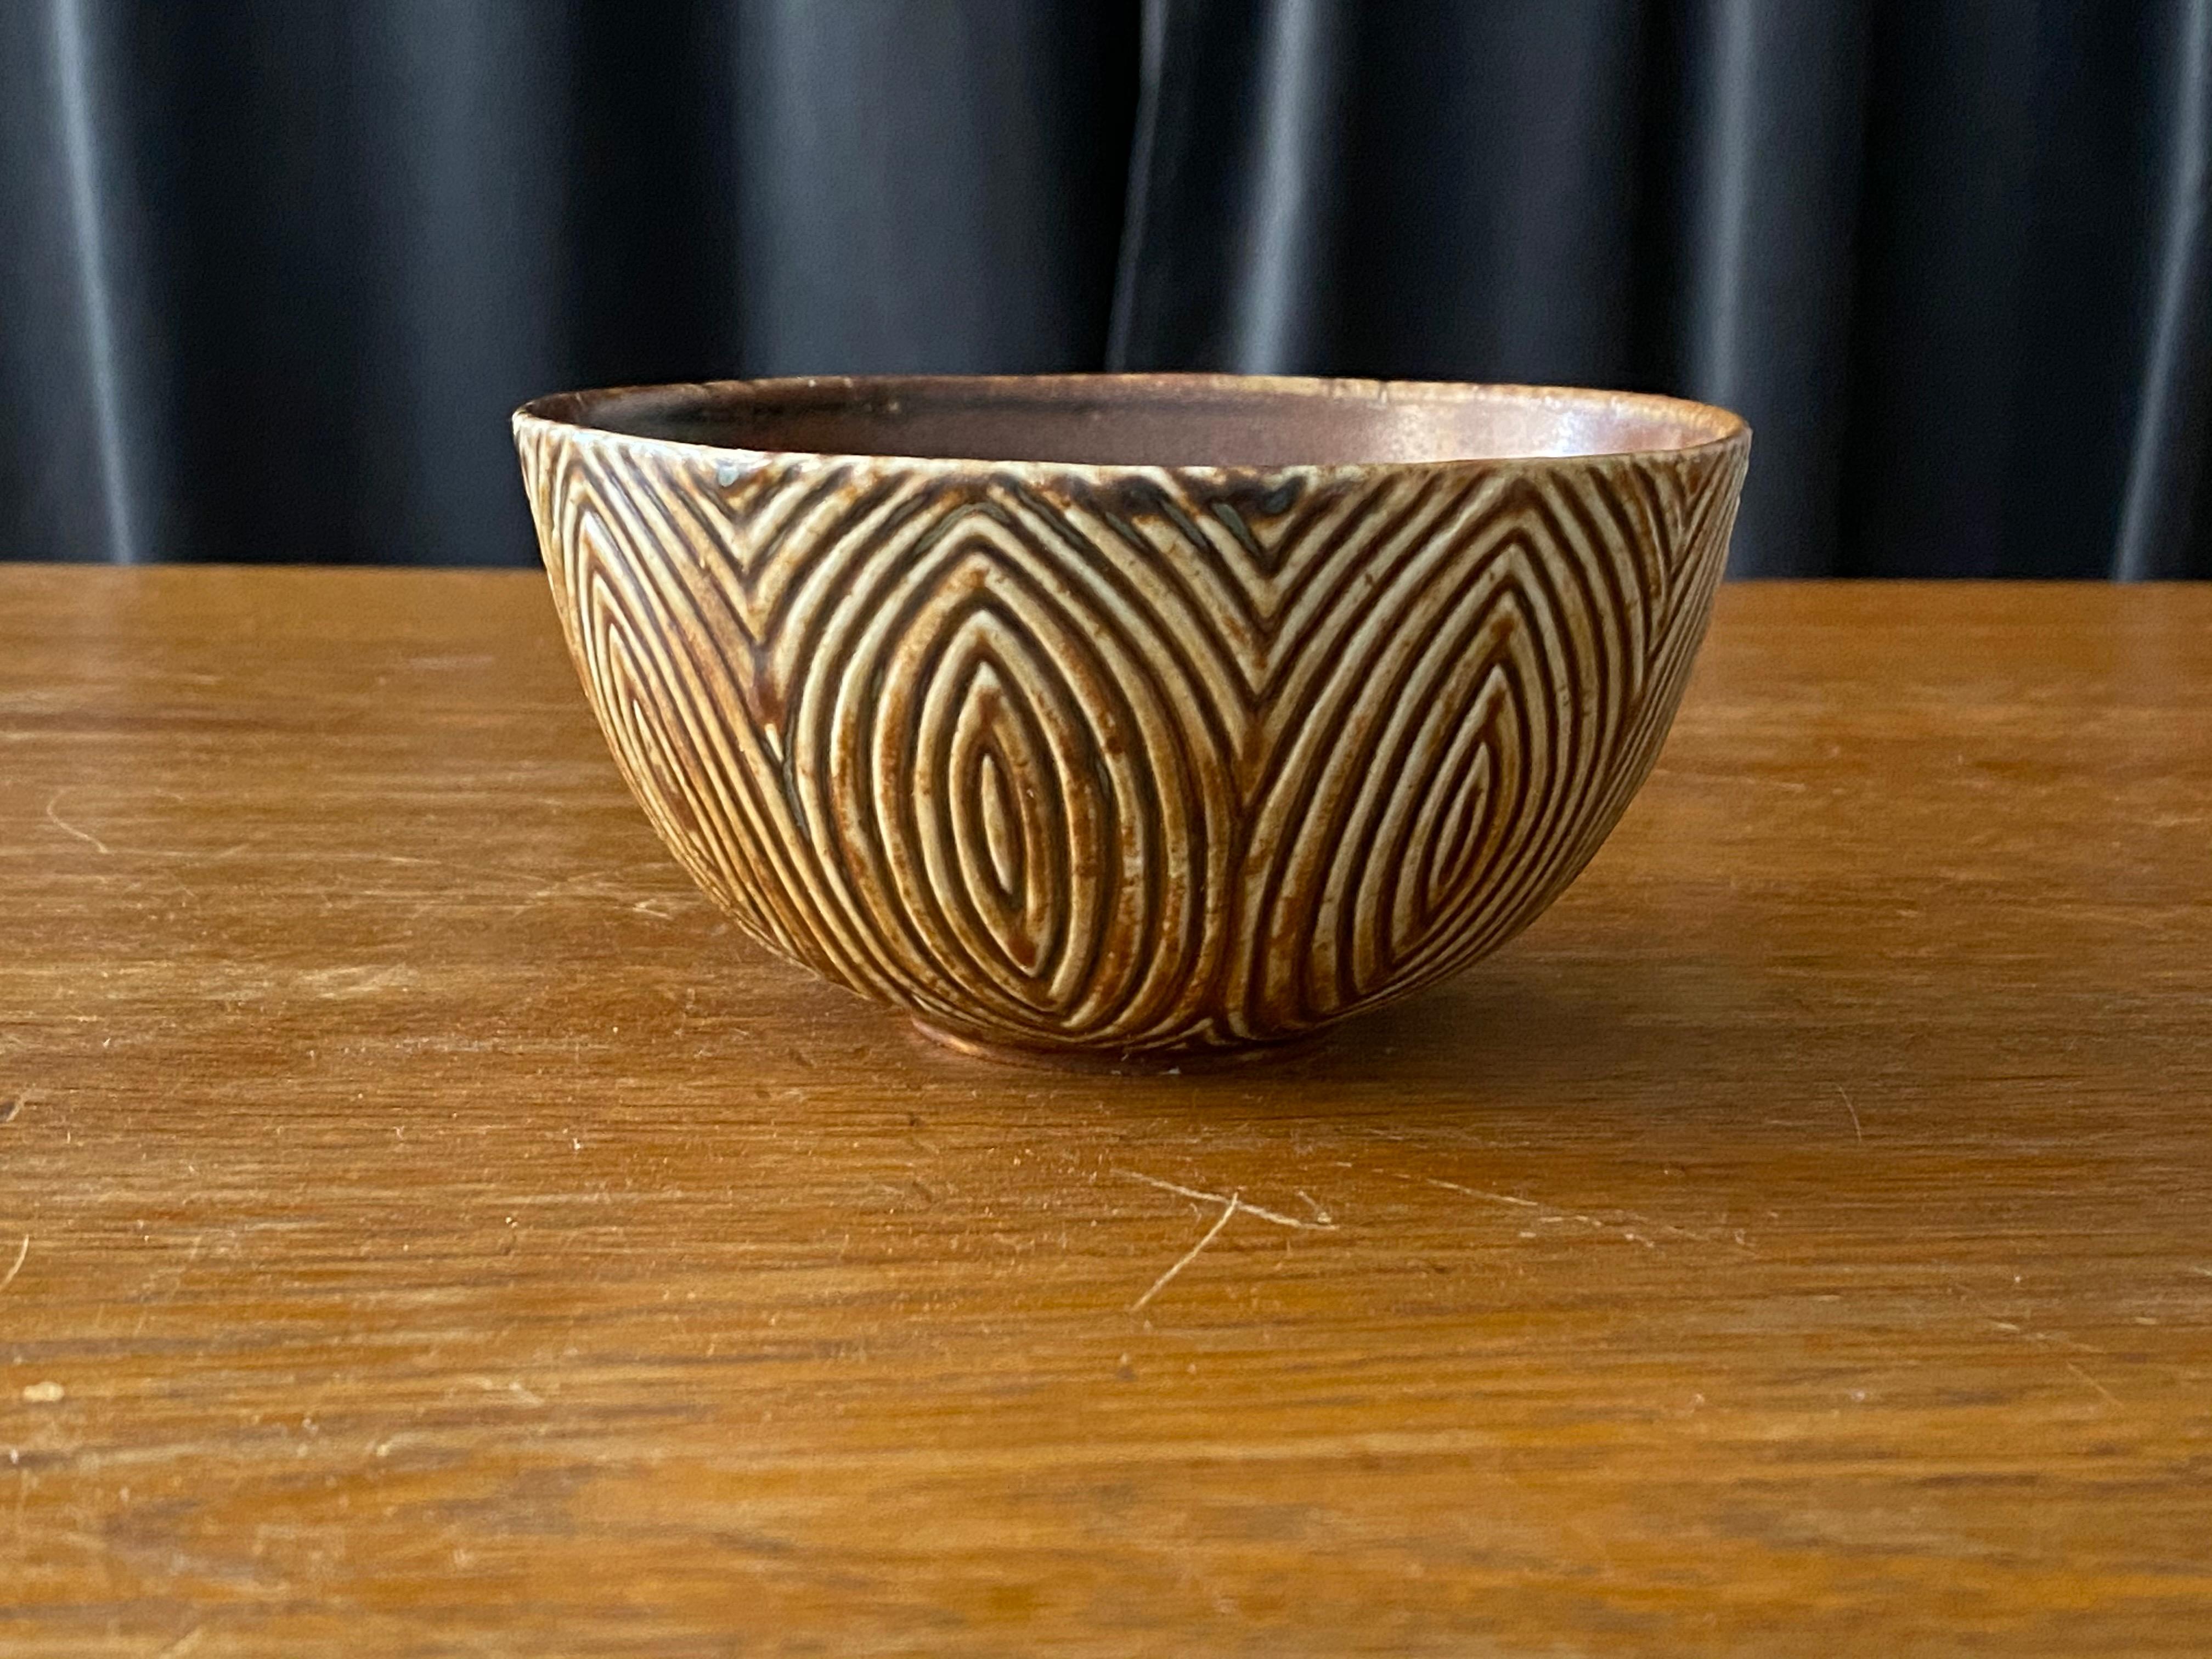 A rare small decorative bowl. Executed in stoneware with a highly ornamented stylized relief and glaze iconic to Salto. Brown and beige. Marked with the Royal Copenhagen mark and signed.

Other ceramicists of the 20th century include Claude